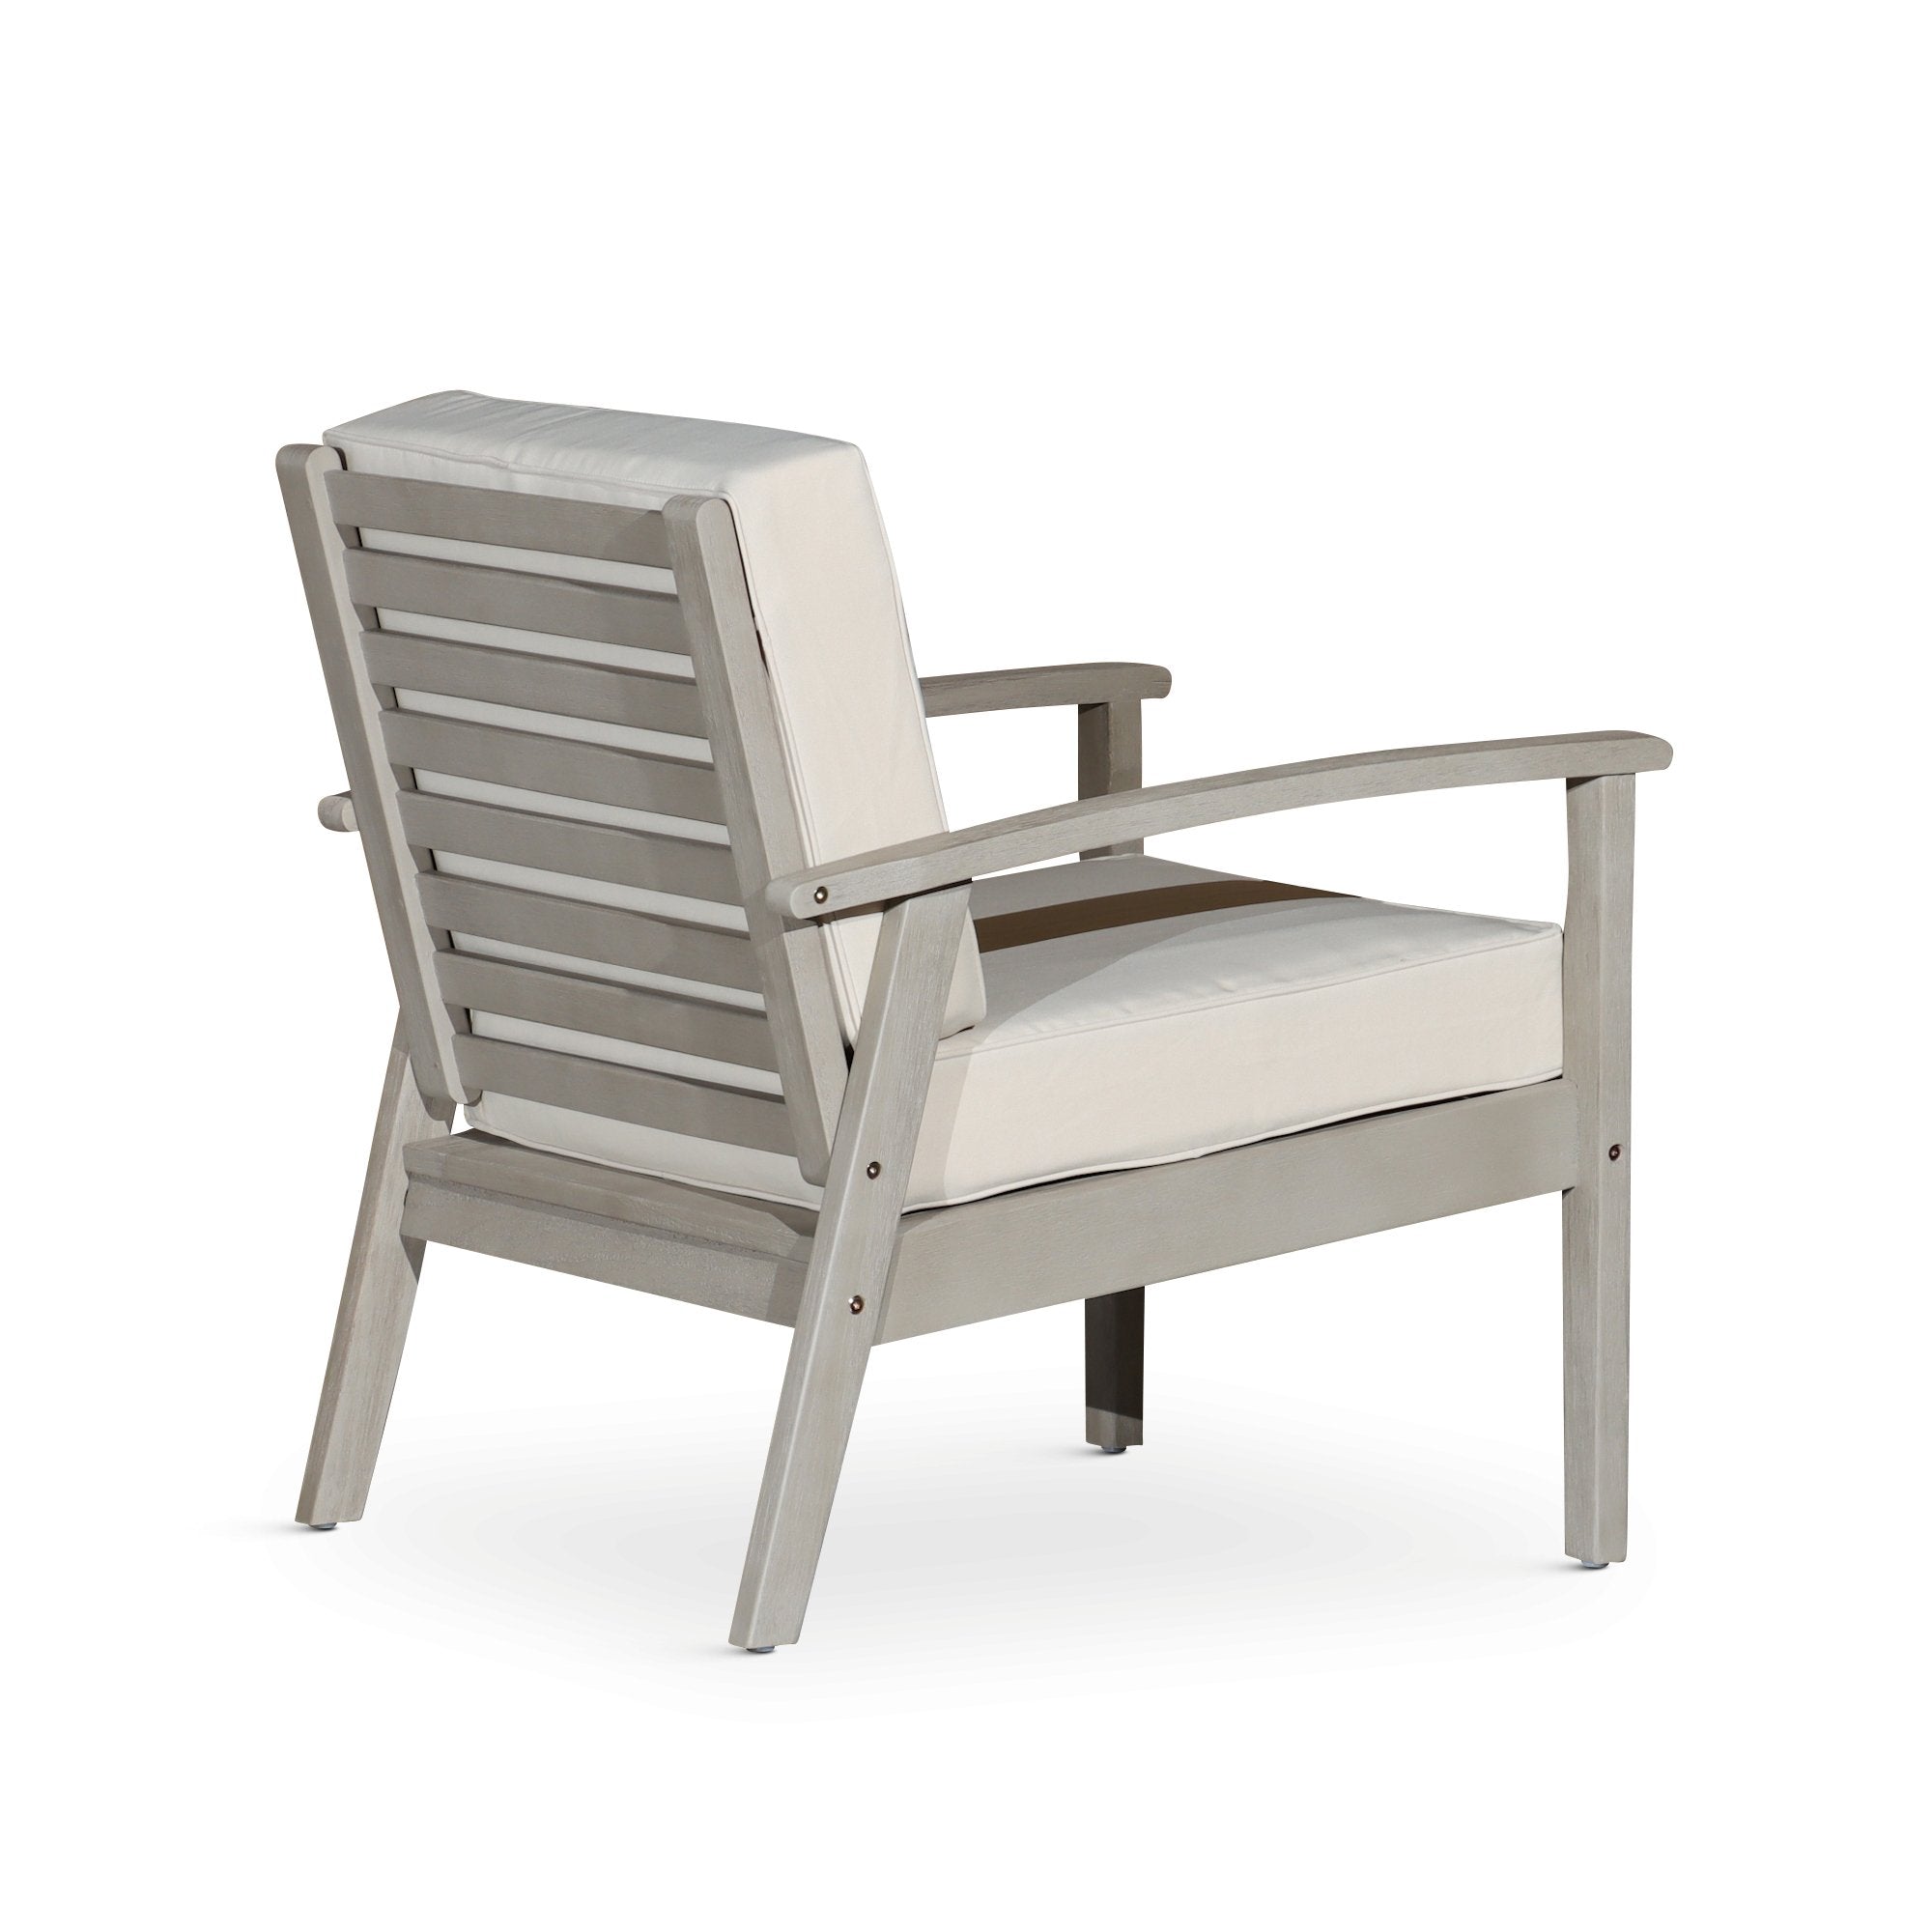 Deep Seat Outdoor Chair, Silver Gray Finish, Navy Cushion - Tuesday Morning-Chairs & Seating